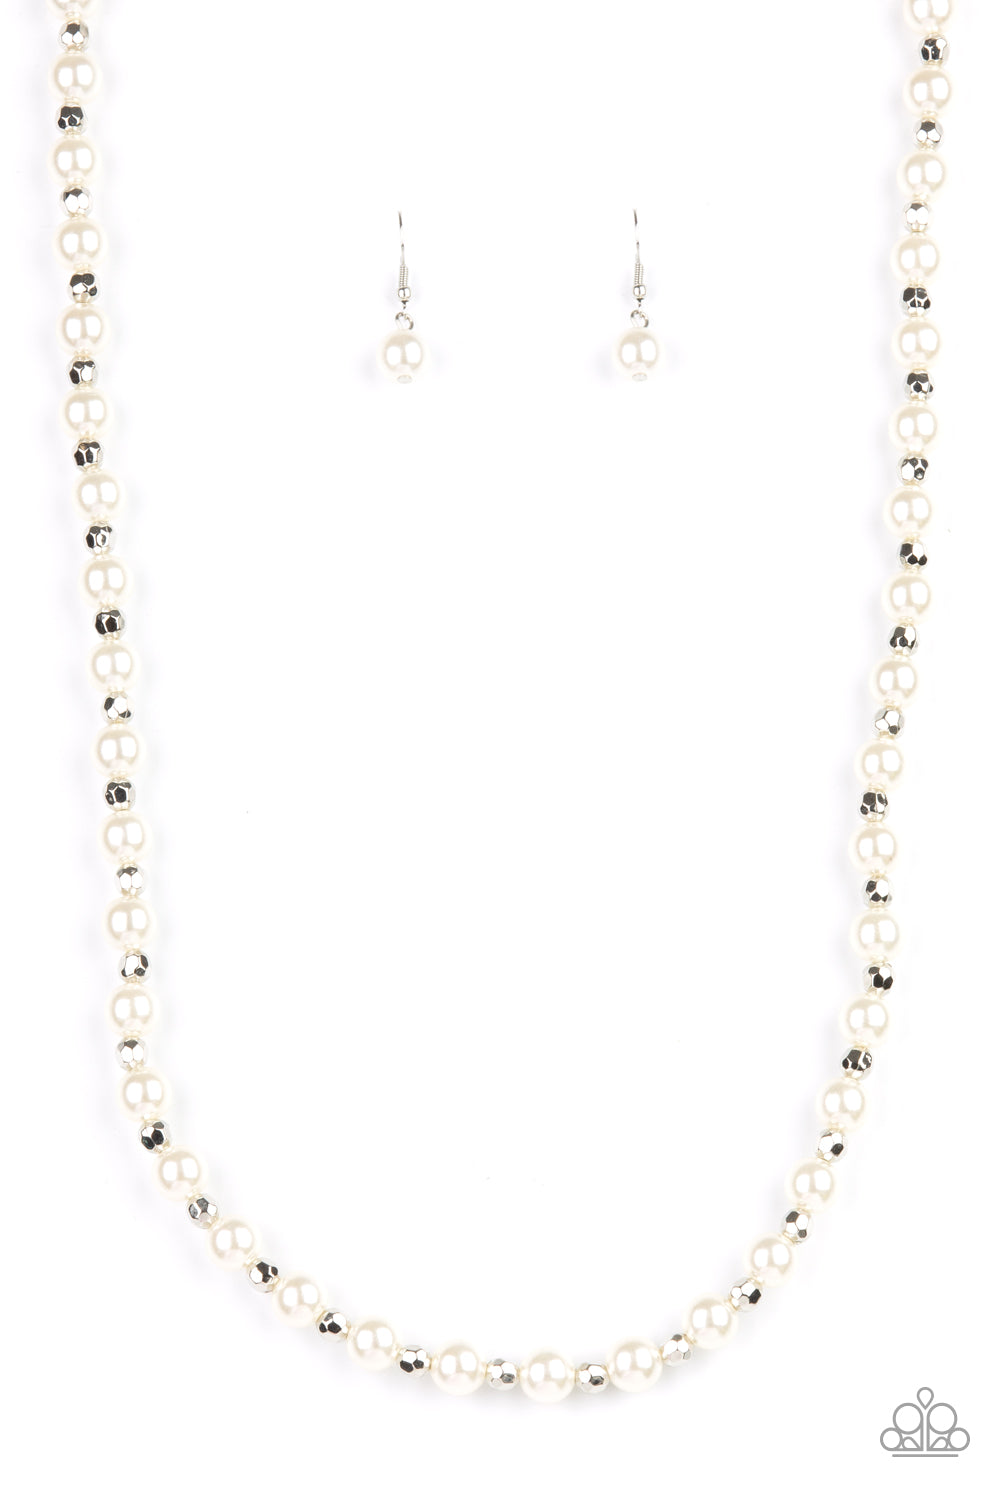 Nautical Novelty White Necklace - Paparazzi Accessories  Classic white pearls and faceted silver beads alternate along an invisible wire below the collar, creating a timeless twist. Features an adjustable clasp closure.  ﻿All Paparazzi Accessories are lead free and nickel free!  Sold as one individual necklace. Includes one pair of matching earrings.